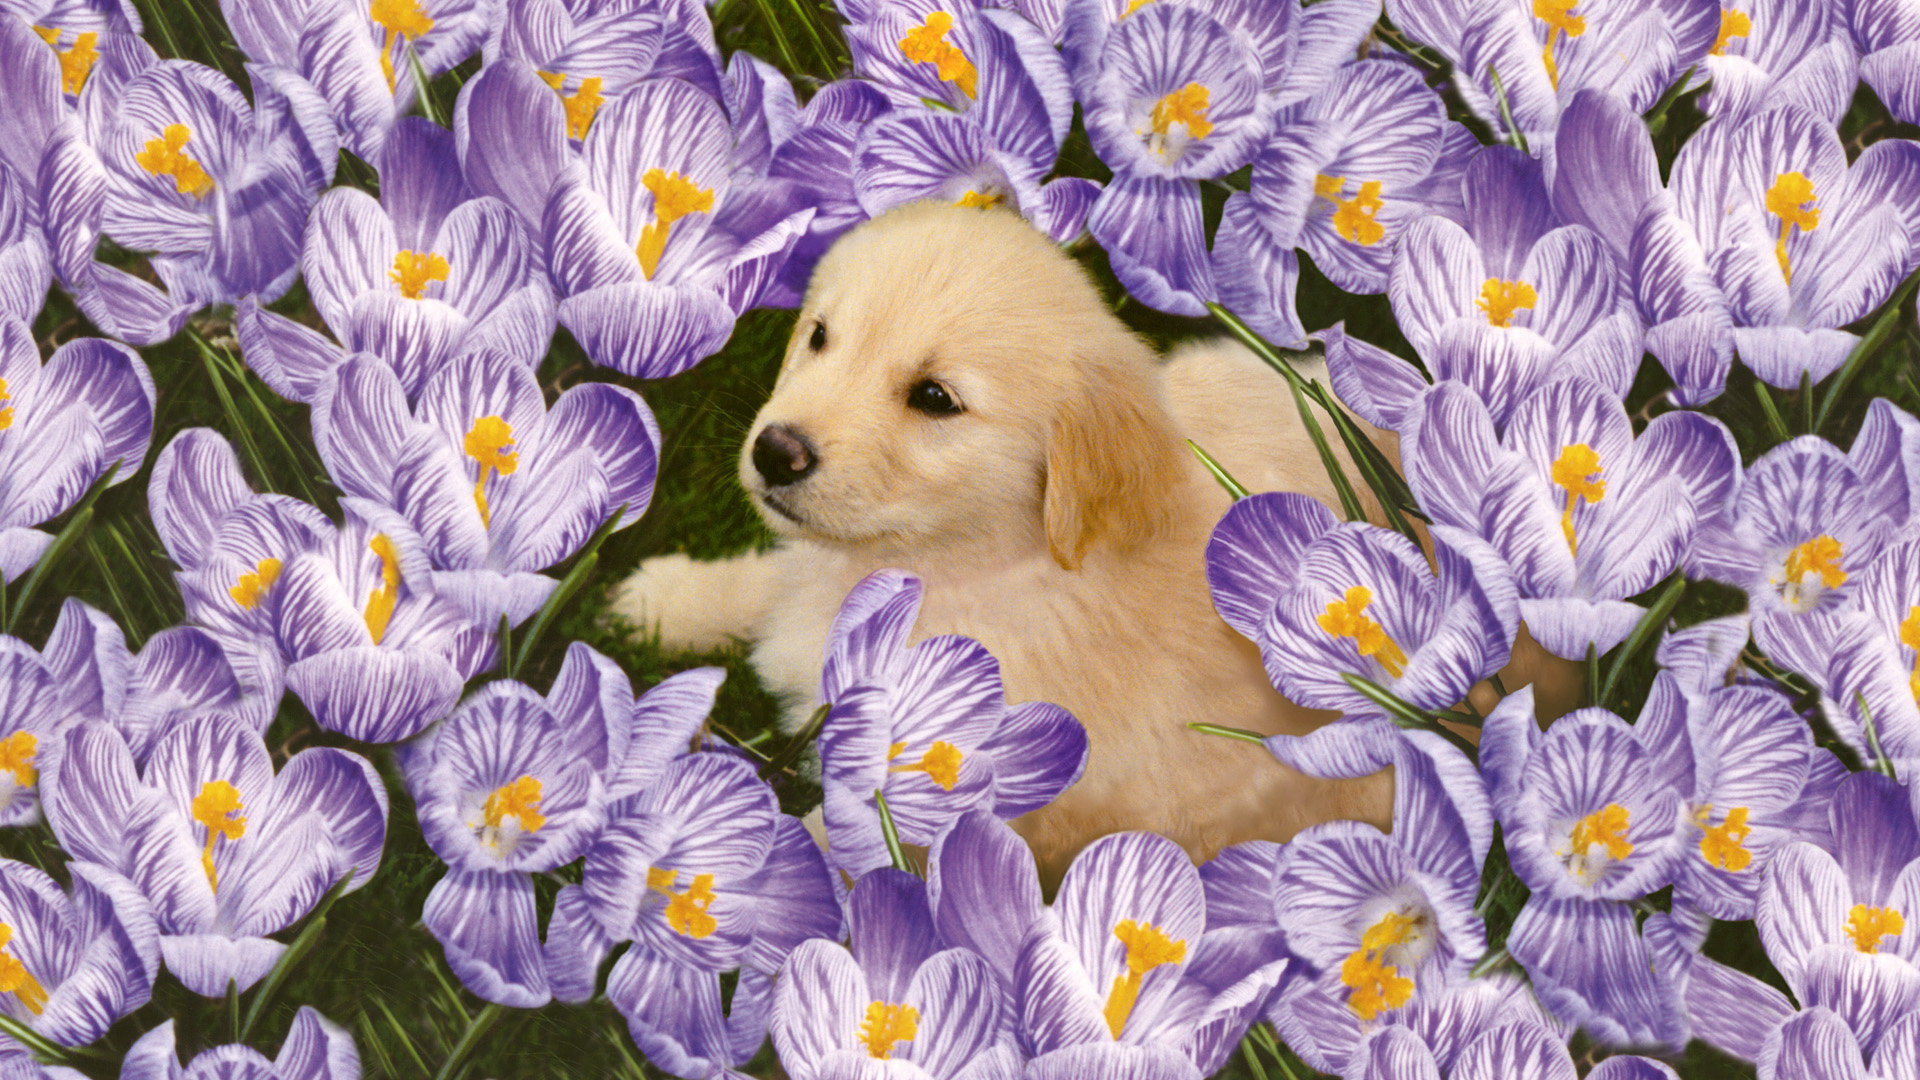 Download full hd Puppy PC background ID:46717 for free